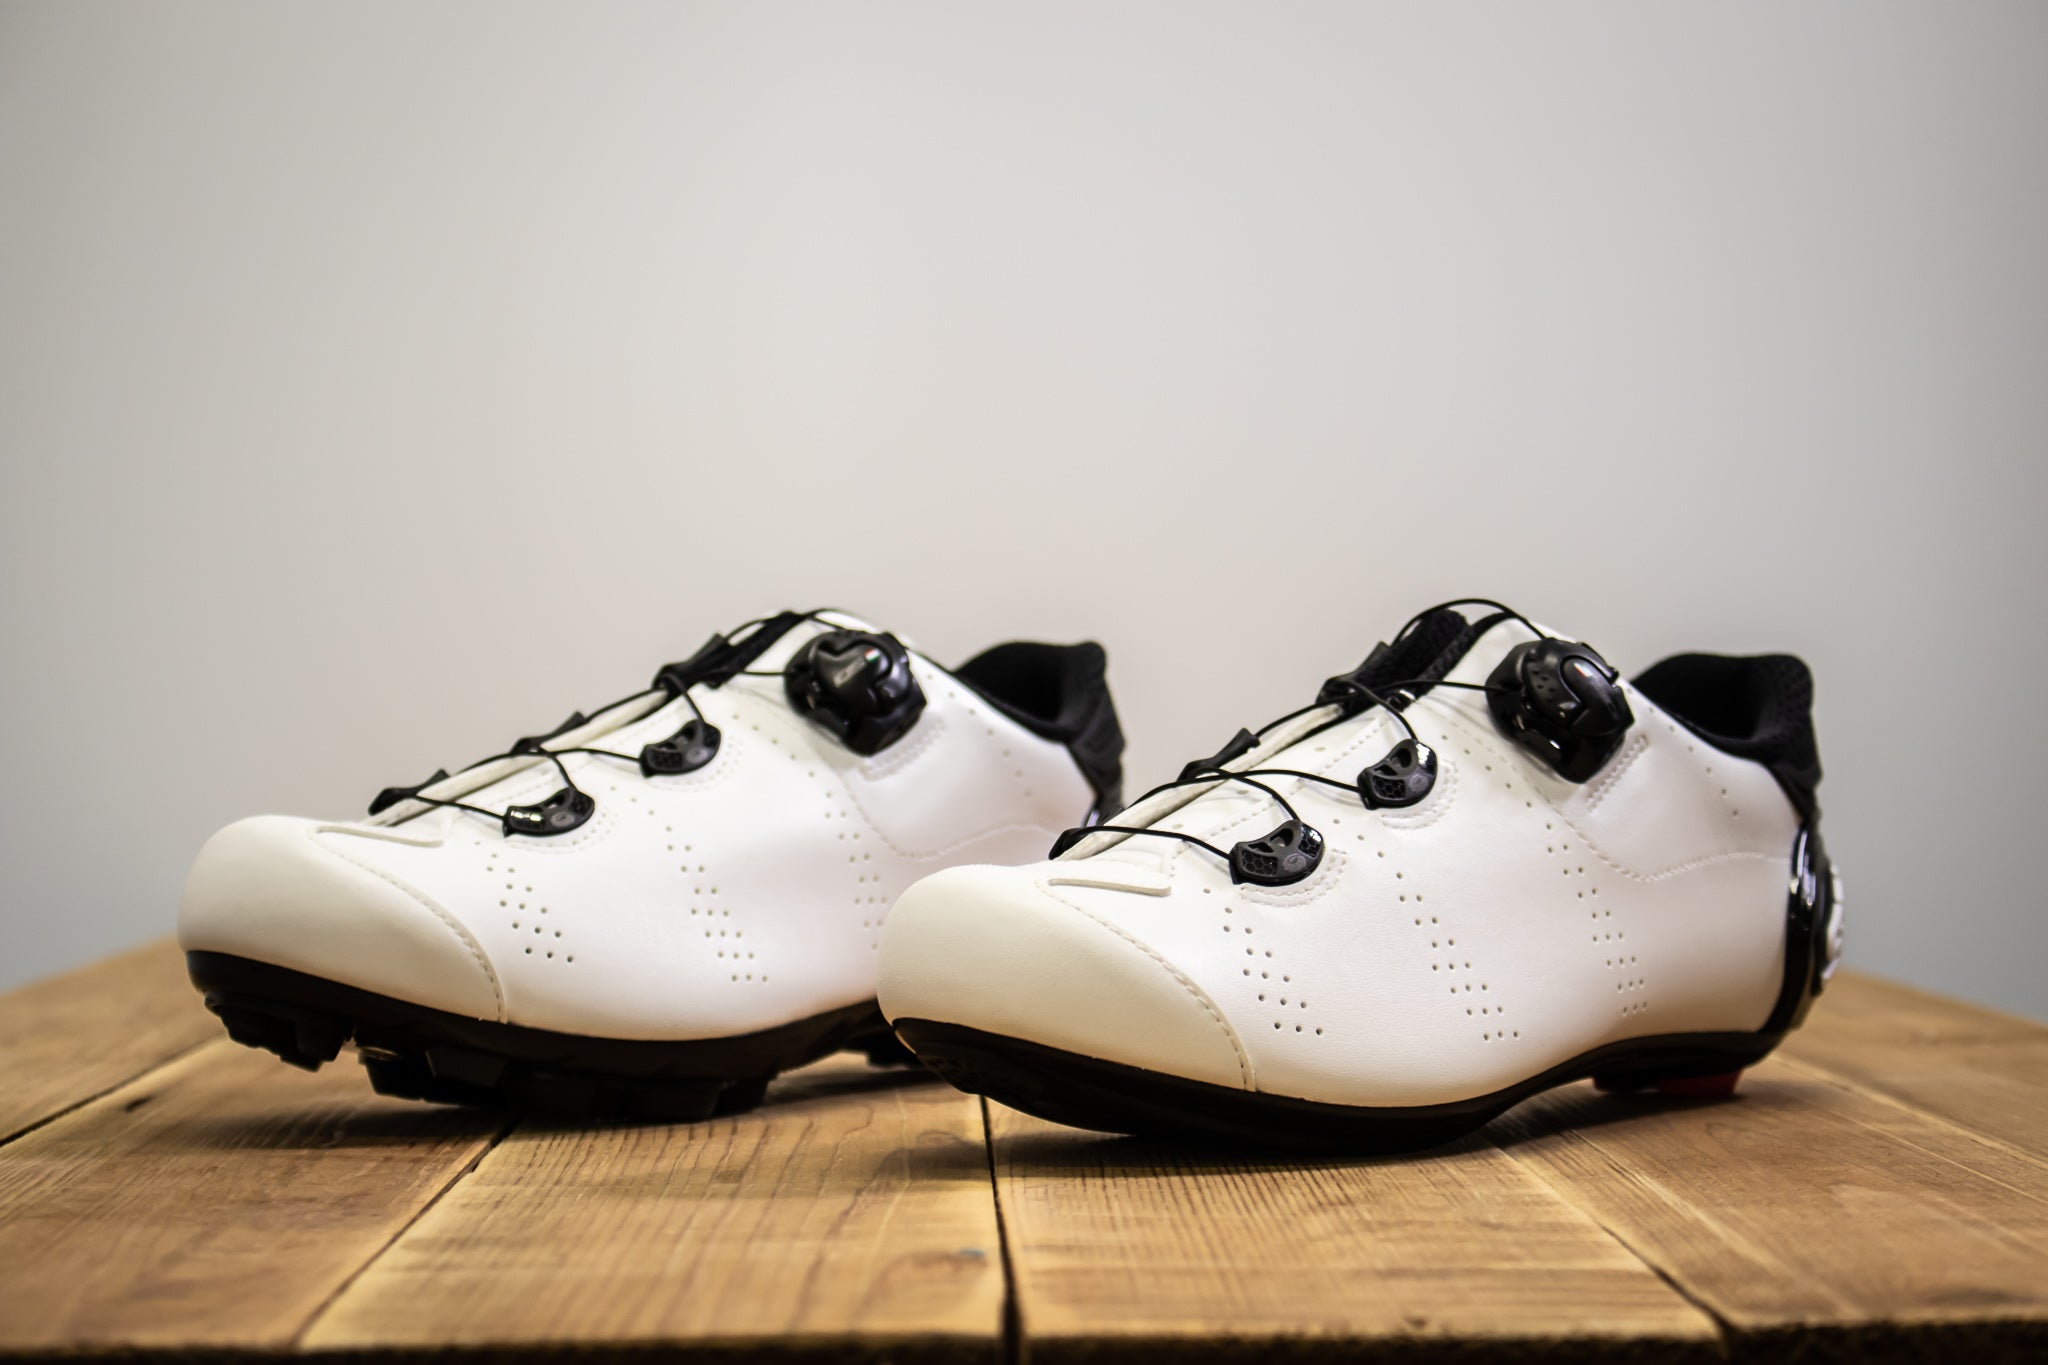 Sidi Fast Road cycling shoes on table 